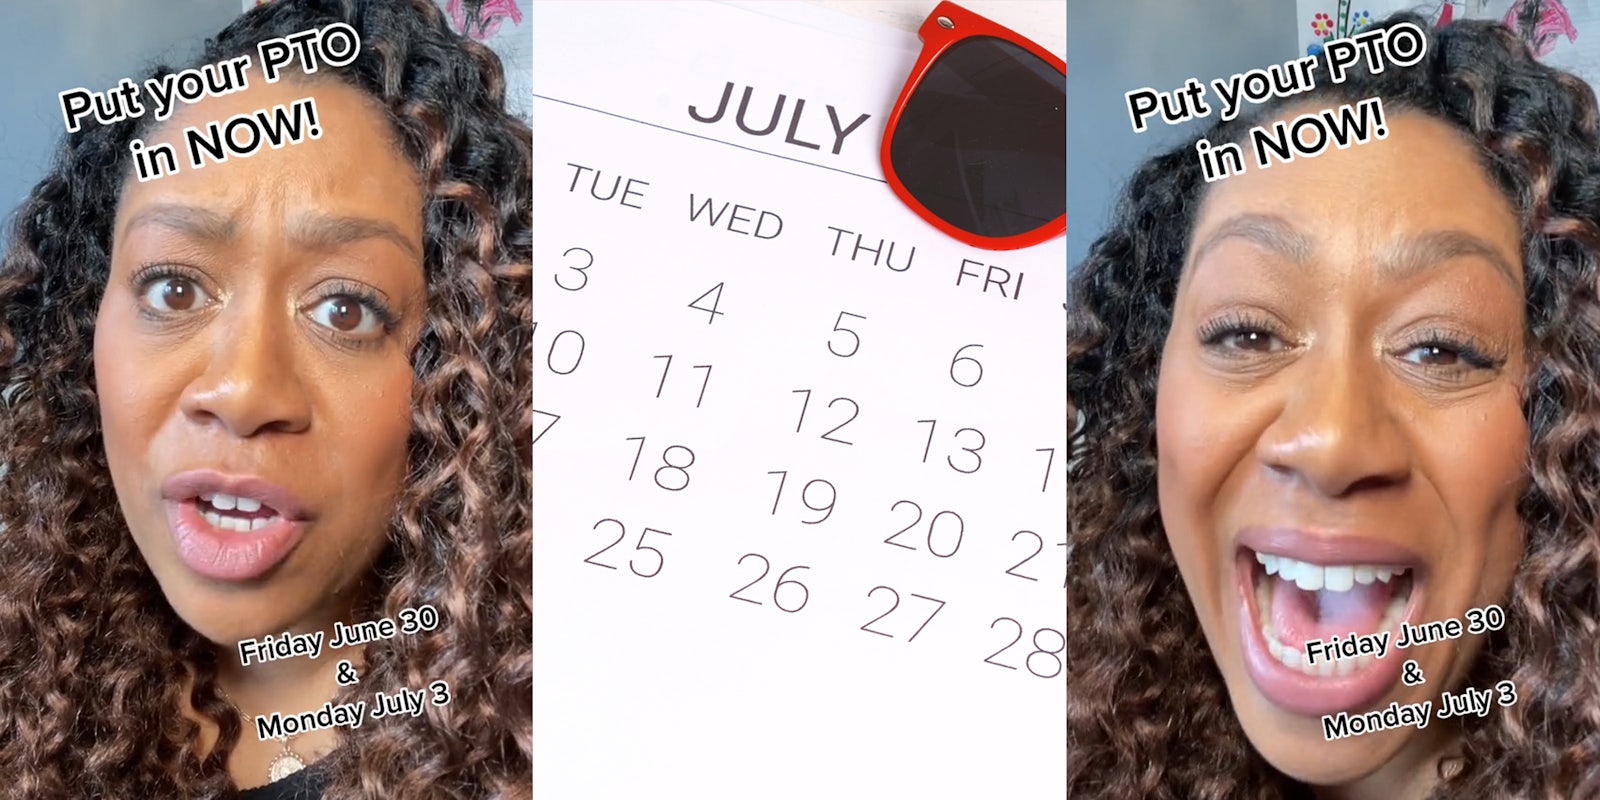 worker speaking with caption 'Put your PTO in NOW!' Friday June 30 & Monday July 3' (l) July calendar with sunglasses (c) worker speaking with caption 'Put your PTO in NOW!' Friday June 30 & Monday July 3' (r)